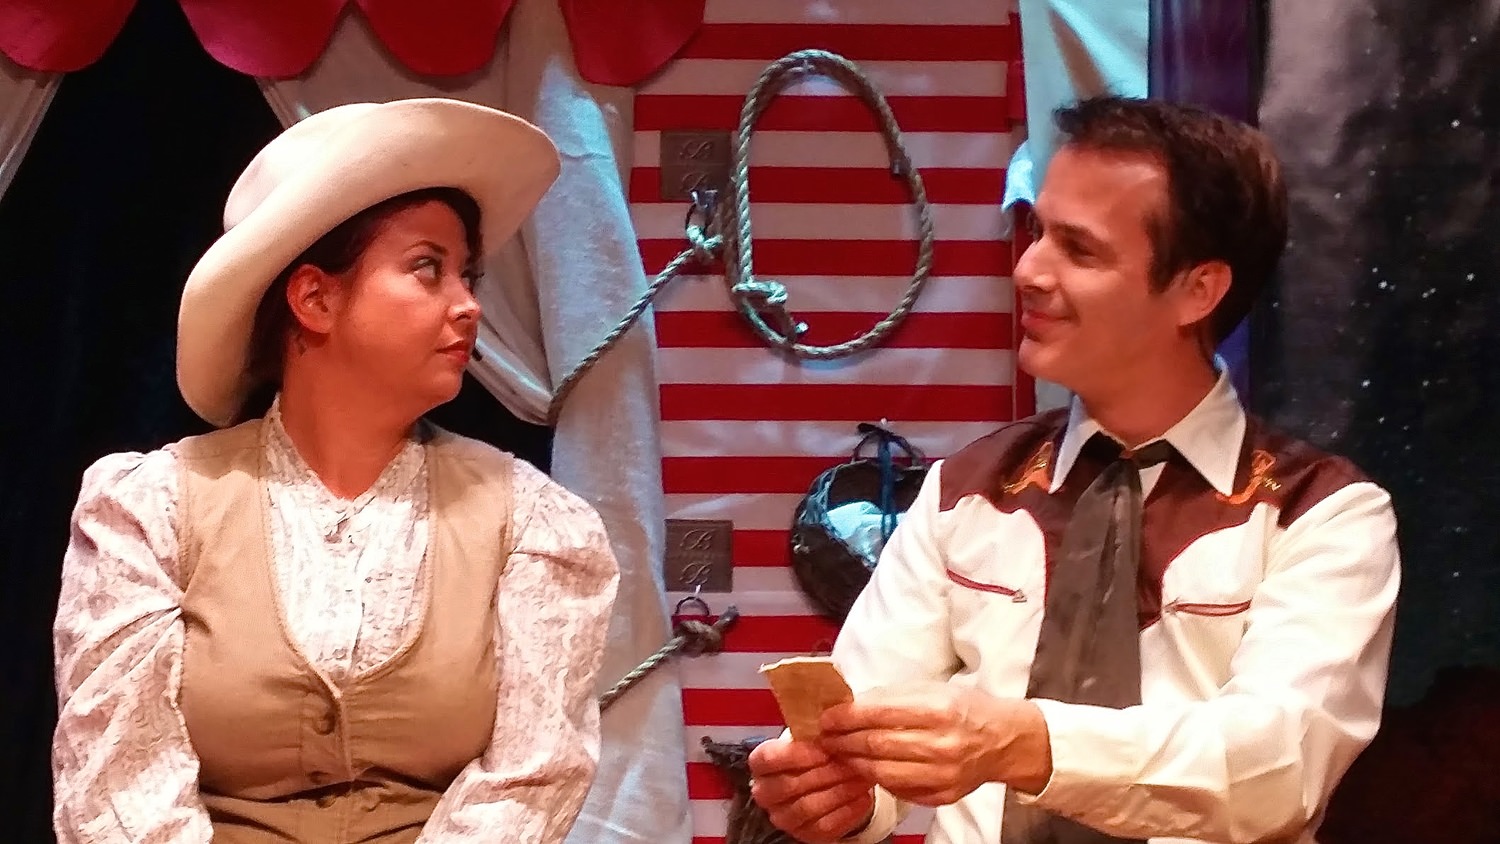 Jordana Forrest as Annie Oakley and James Skiba as Frank Butler in the Curtain Call Playhouse production of Annie Get Your Gun. http://www.geoffreybshort.com/events.html 8